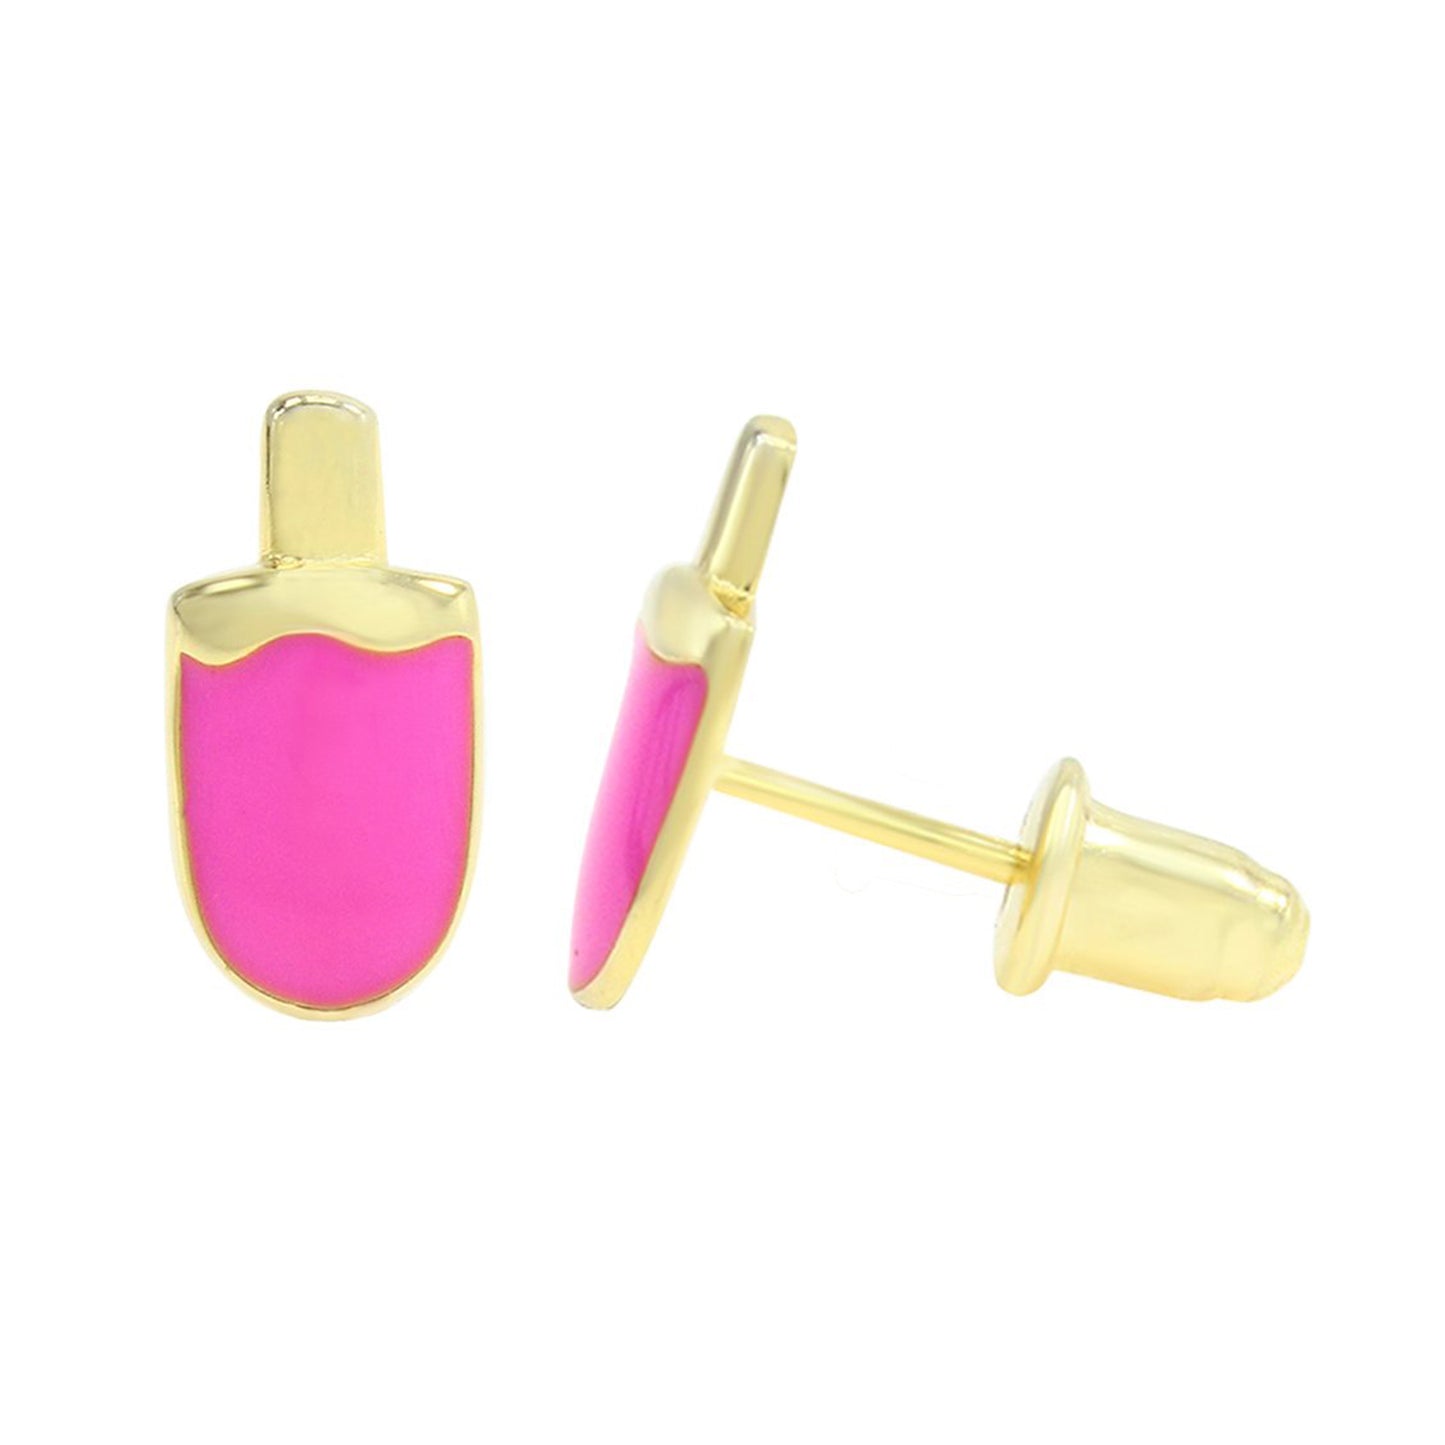 Load image into Gallery viewer, Jewelry Candy Ice Cream Pink Enamel Stud Earrings In 925 Over Sterling Silver
